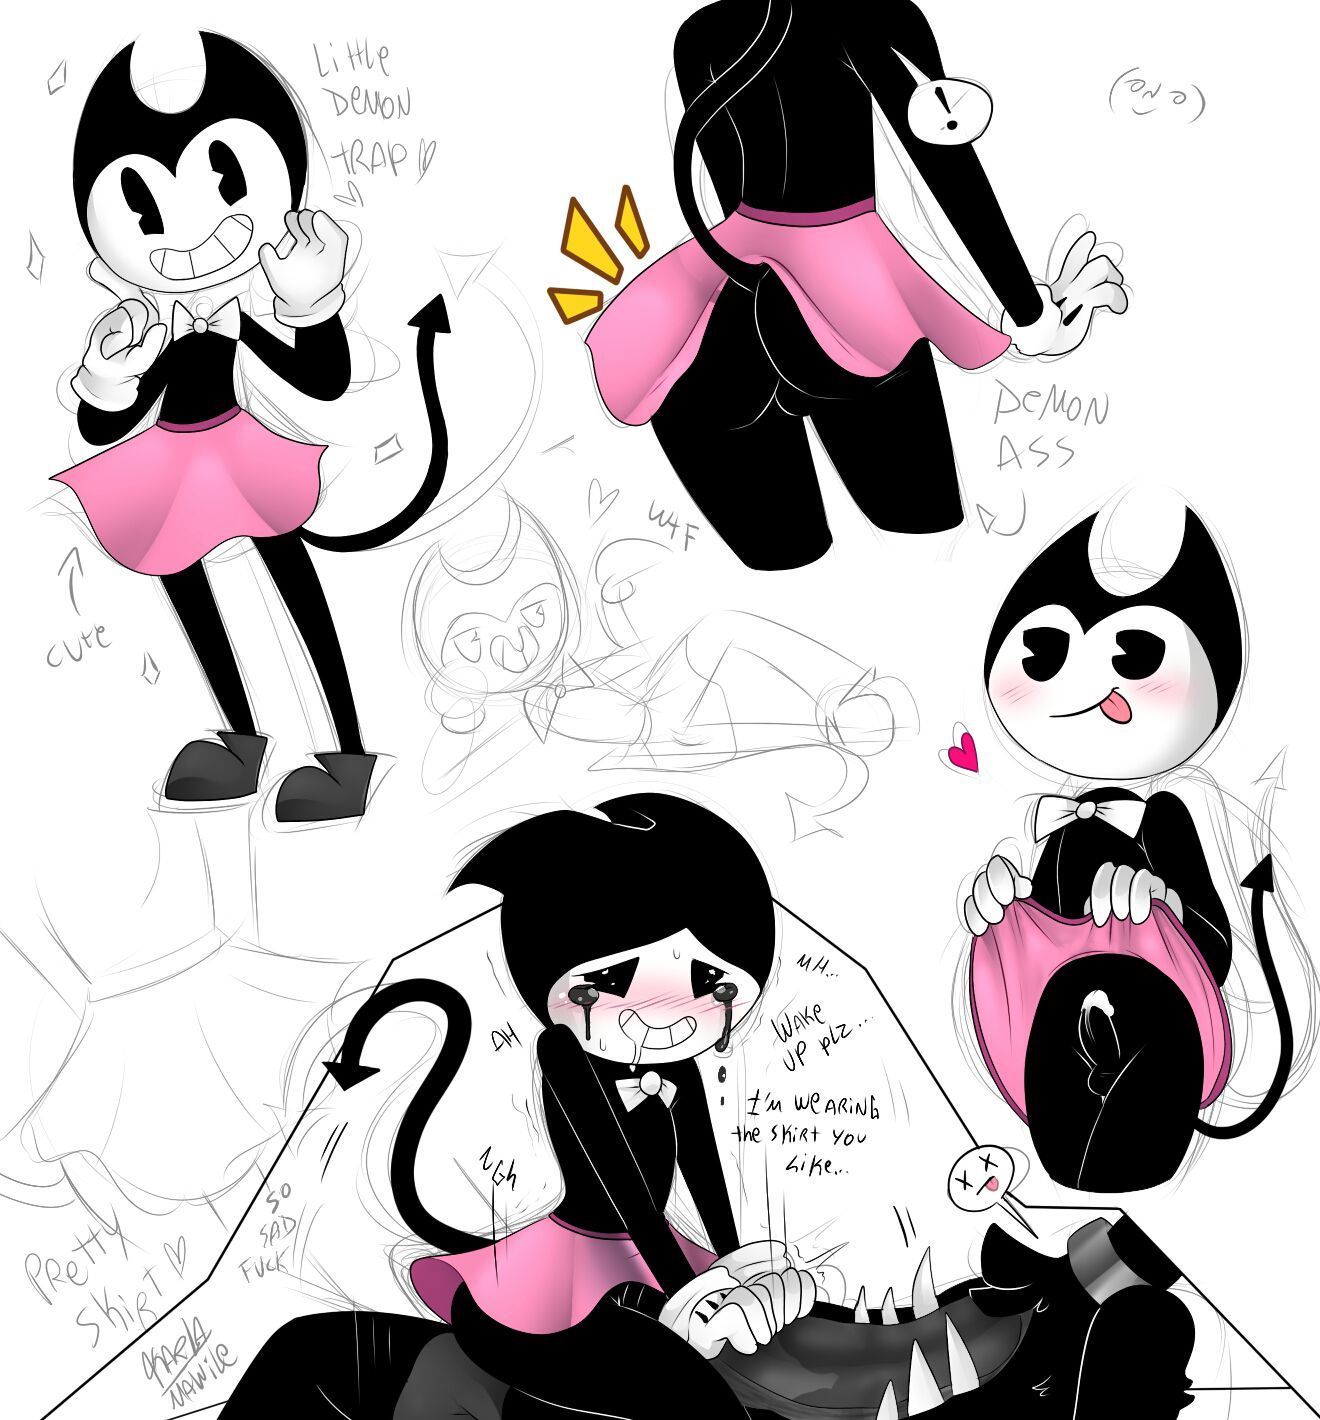 Bendy and the ink machine porno.